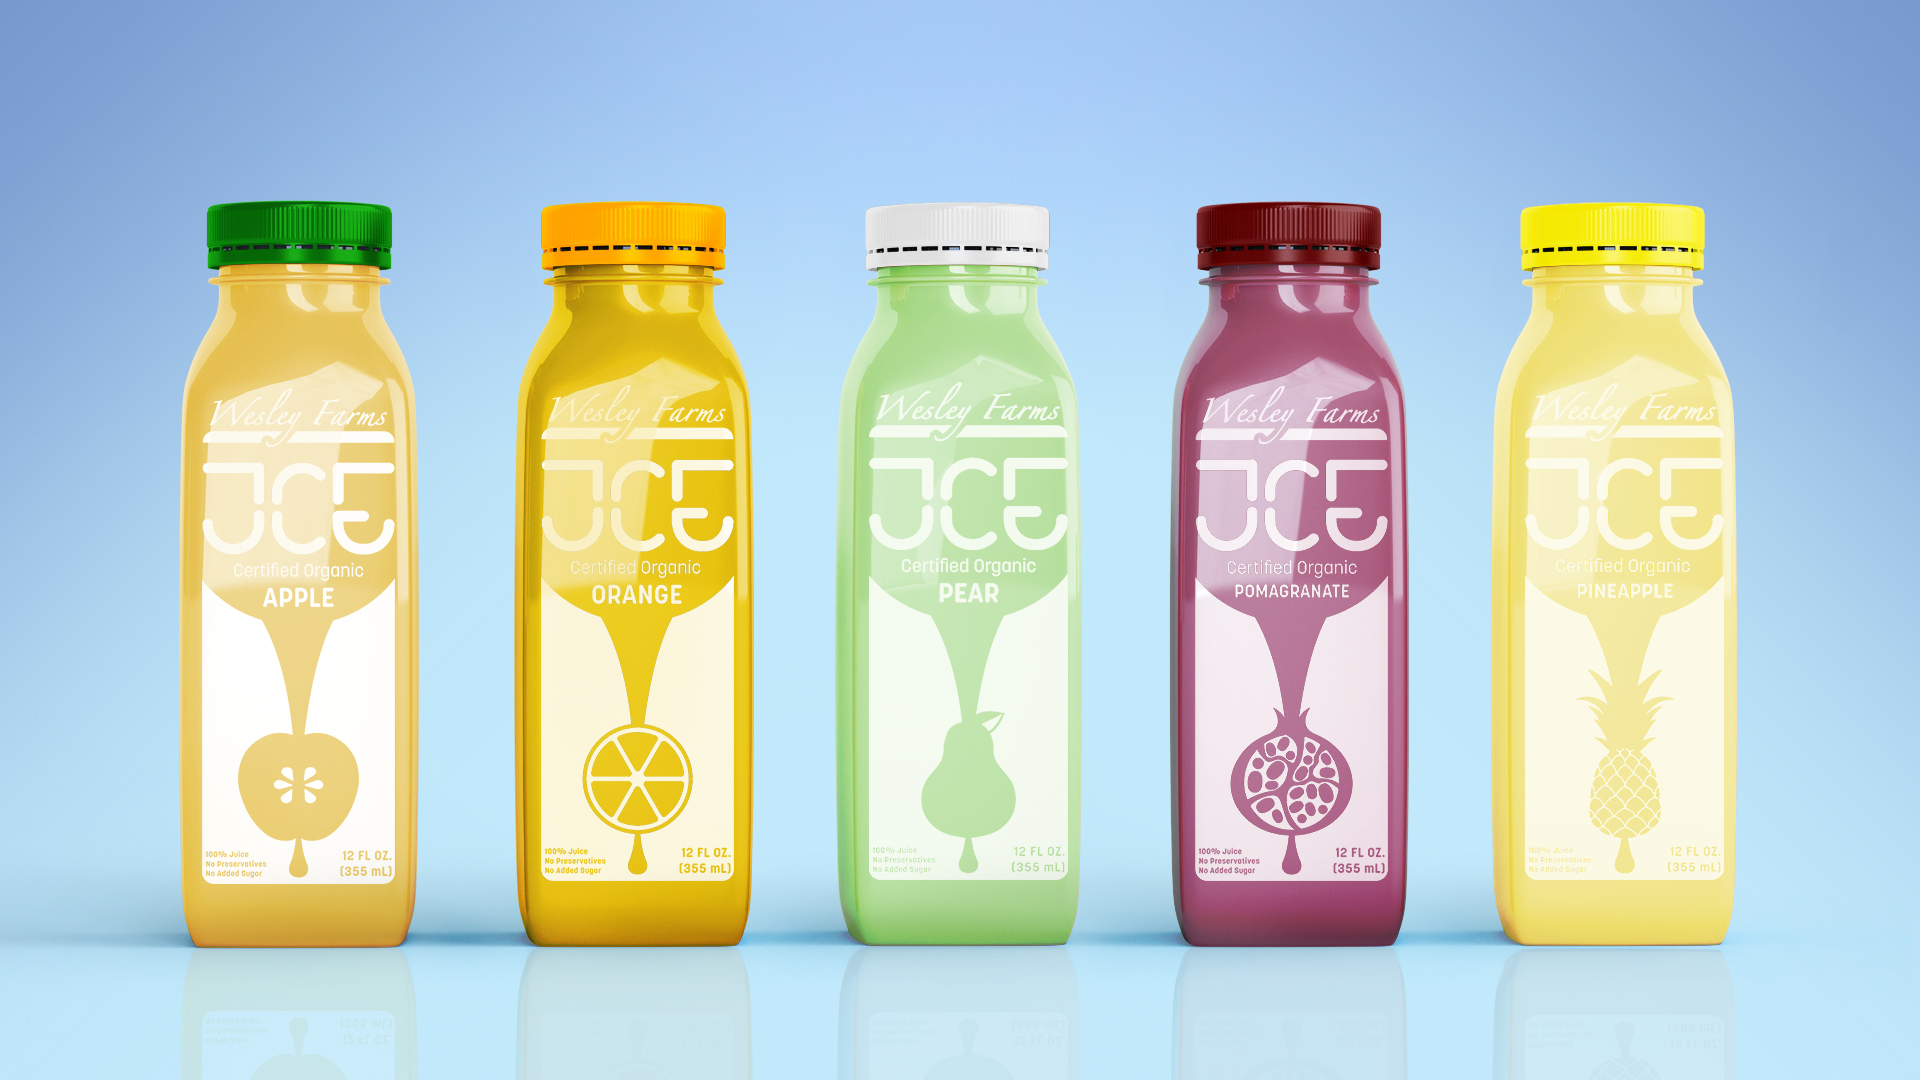  / “JCE” Bottle Label Design, 2”x5” print on plastic, 2021. This line of juices uses negative space to show the juice inside the bottle, while making it clear what type of juice is inside."